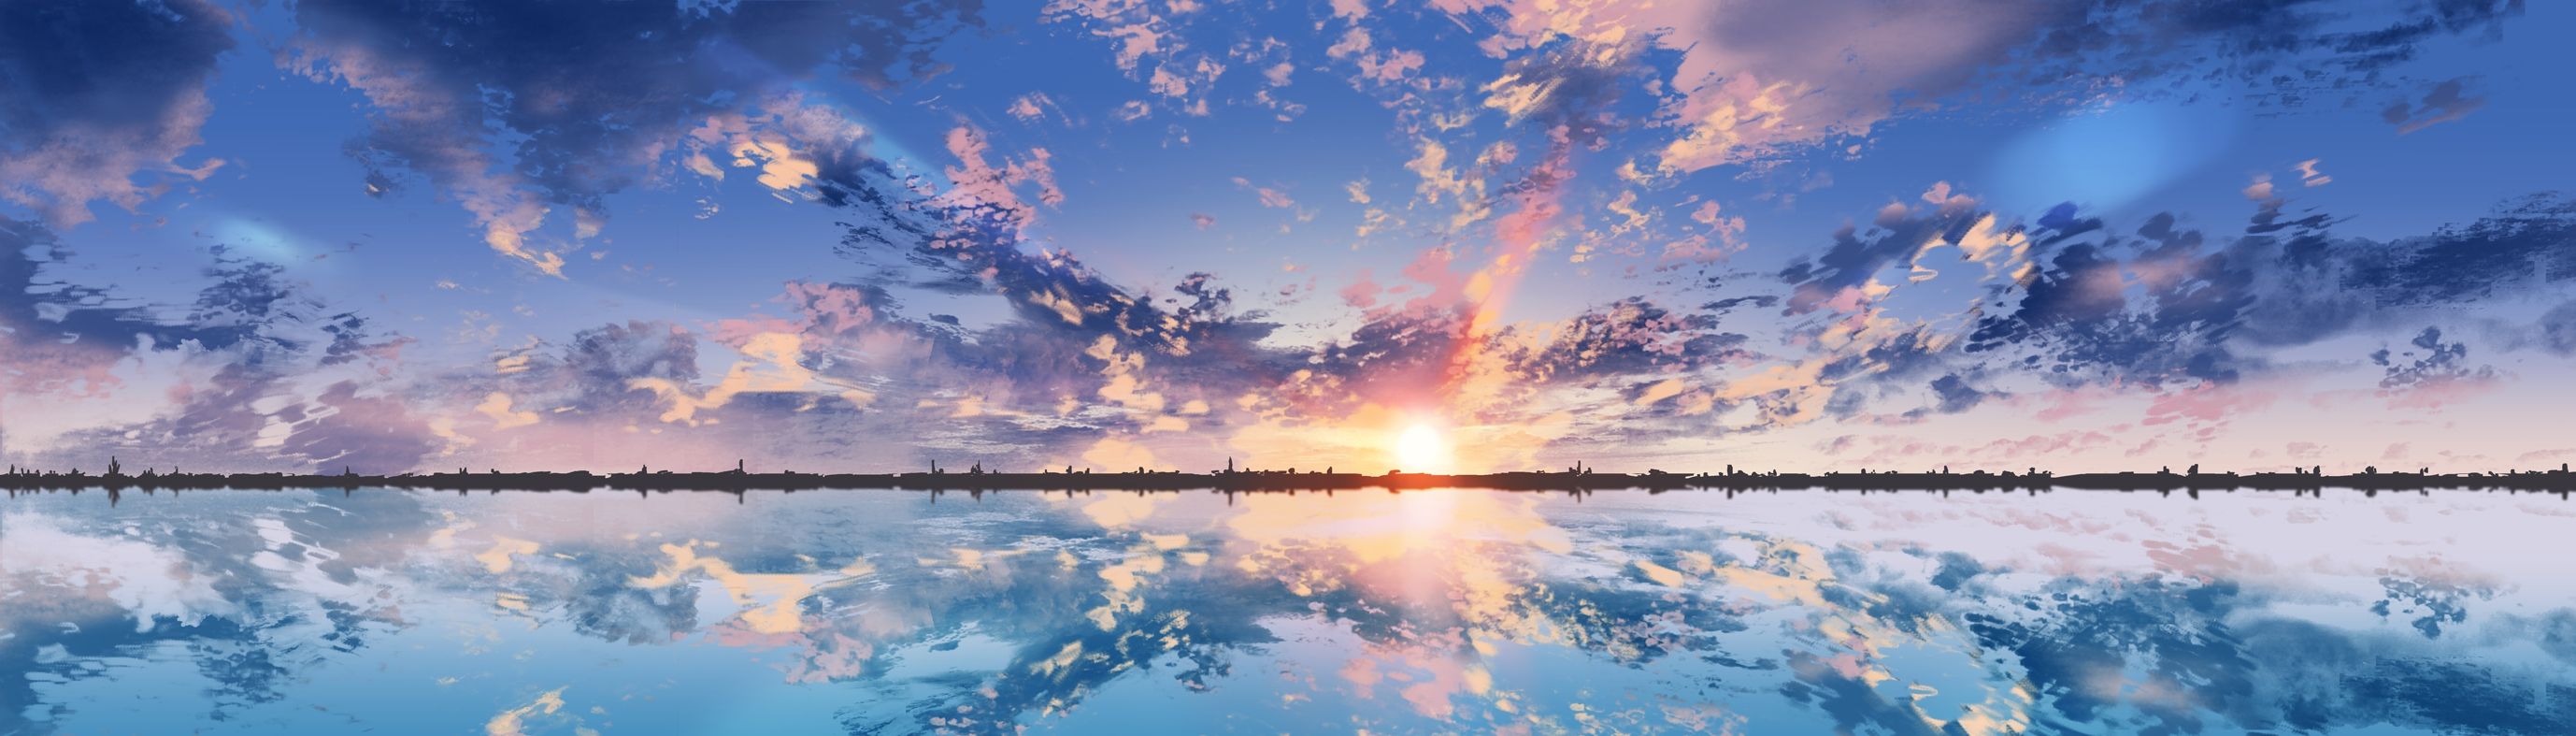 Download 2756x787 Anime Scenic, Clouds, Sunset, Reflection, Dual